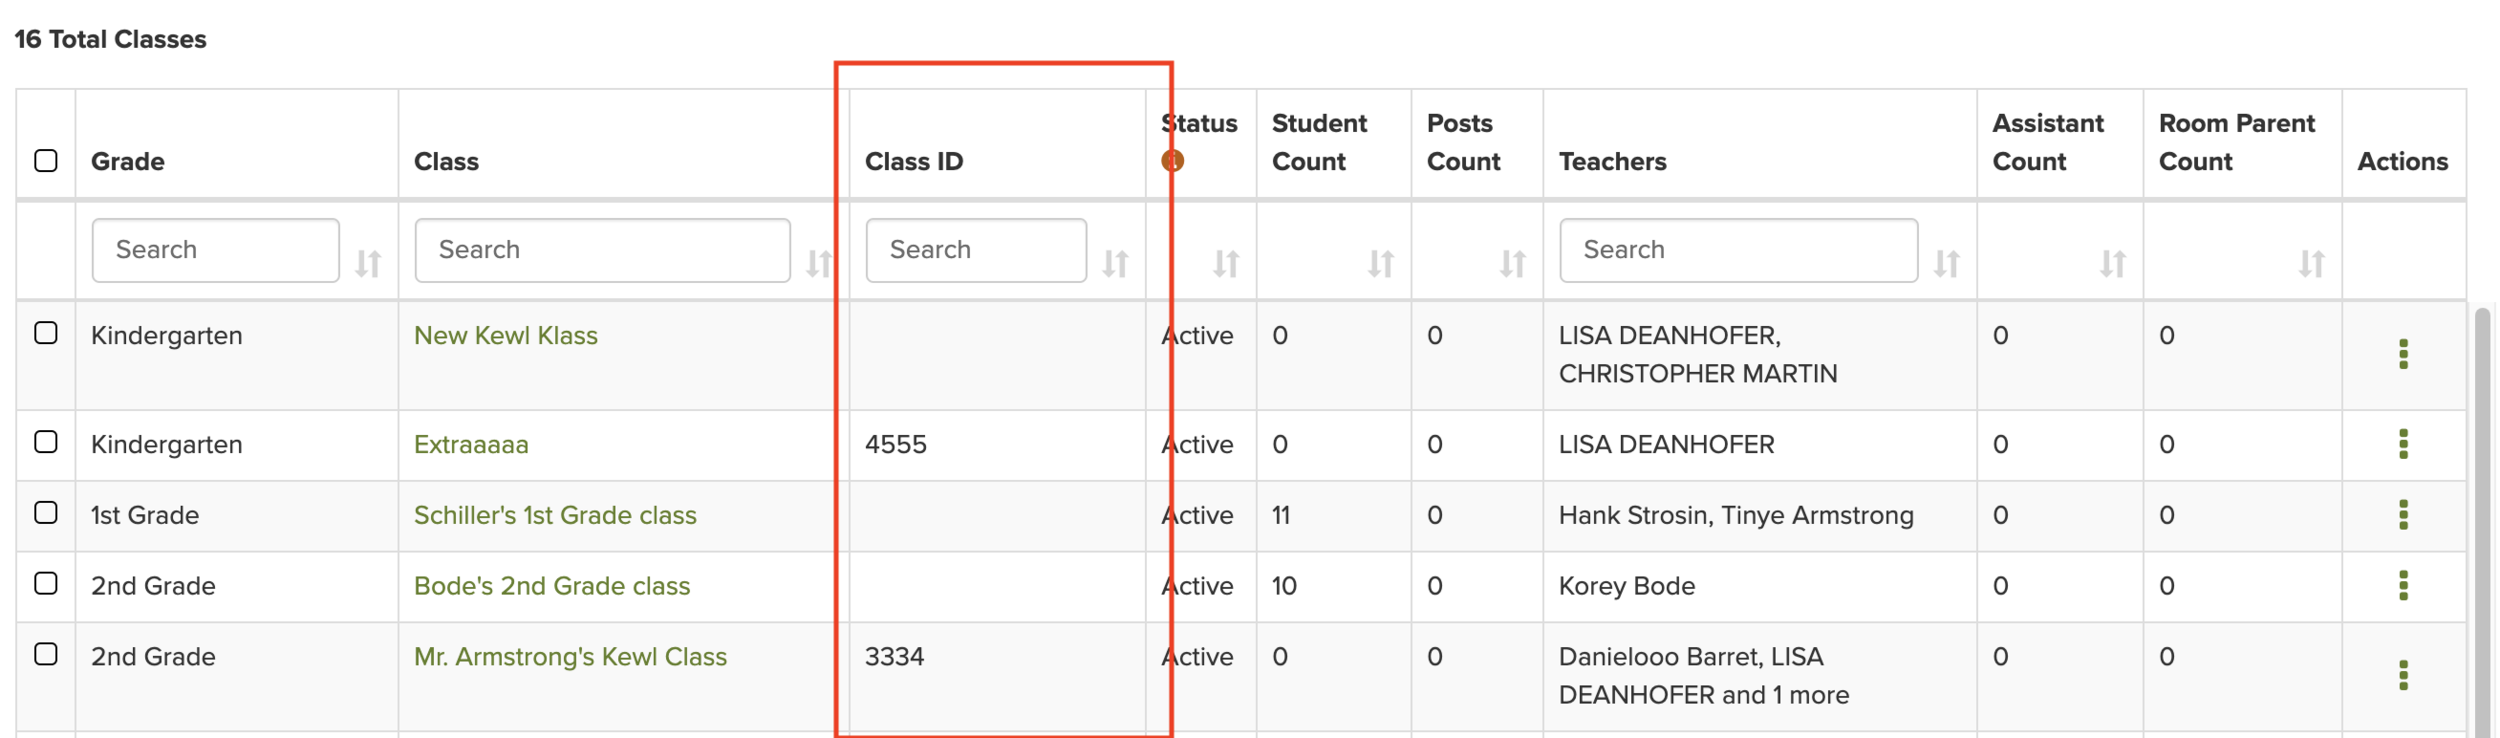 Screenshot showing the Class ID section in the Data Assistant in the ParentSquare platform